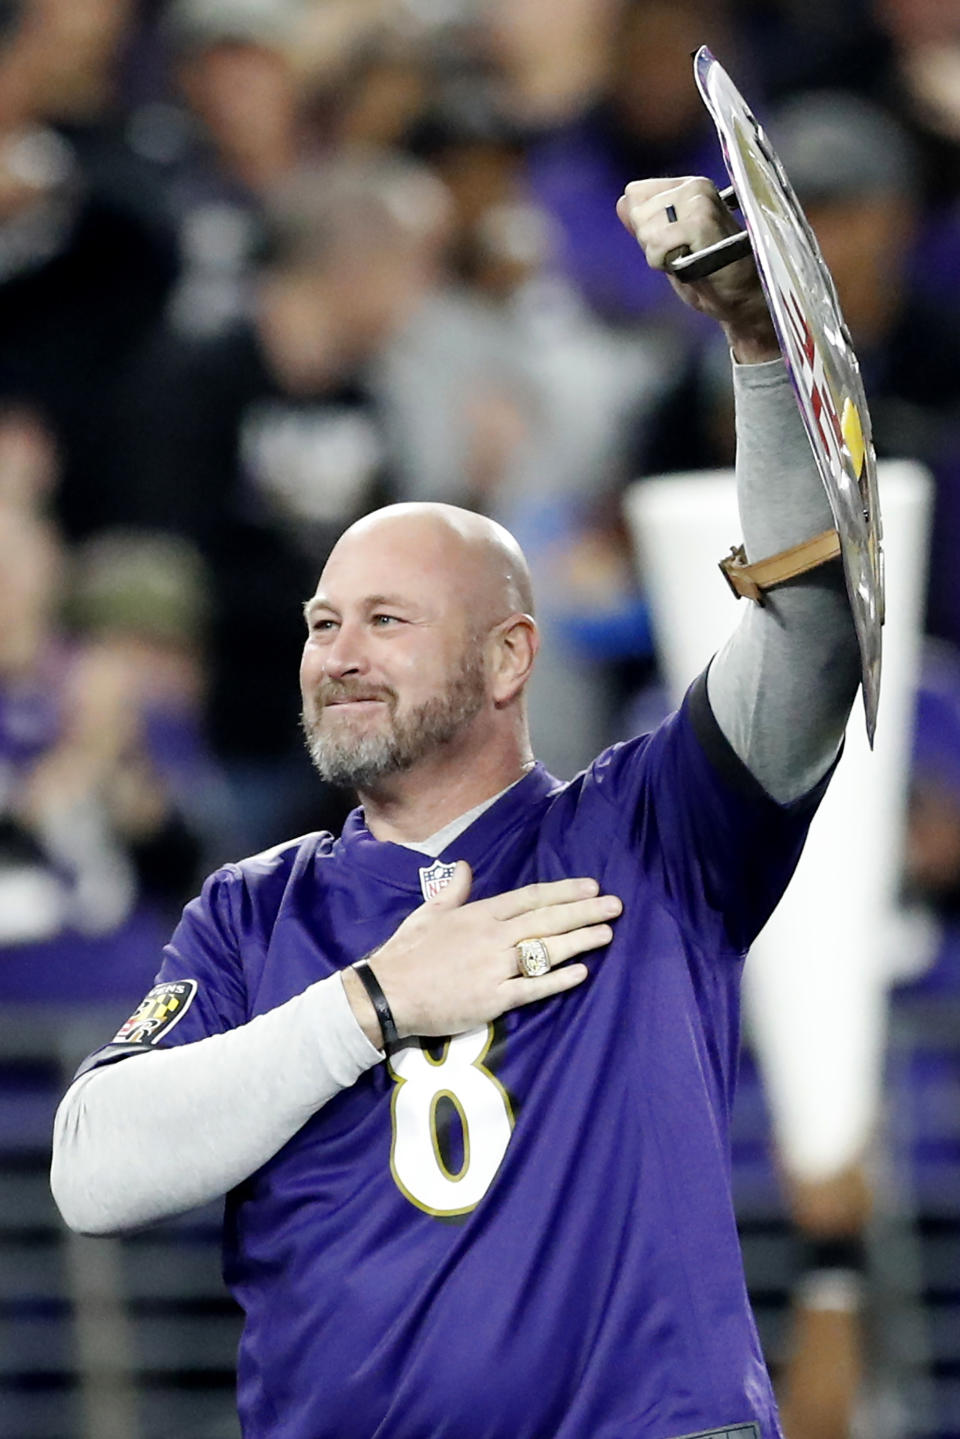 FILE - Former Baltimore Ravens quarterback Trent Dilfer is introduced on the field prior to an NFL divisional playoff football game against the Tennessee Titans, Saturday, Jan. 11, 2020, in Baltimore. Former NFL quarterback Trent Dilfer, who has been coaching a high school team in Tennessee for the last four years, is the leading candidate to become the new coach at UAB, a person with knowledge of the search told The Associated Press on Tuesday night, Nov. 29, 2022.The person spoke on condition of anonymity because UAB was not making details of its search public.(AP Photo/Julio Cortez, File)